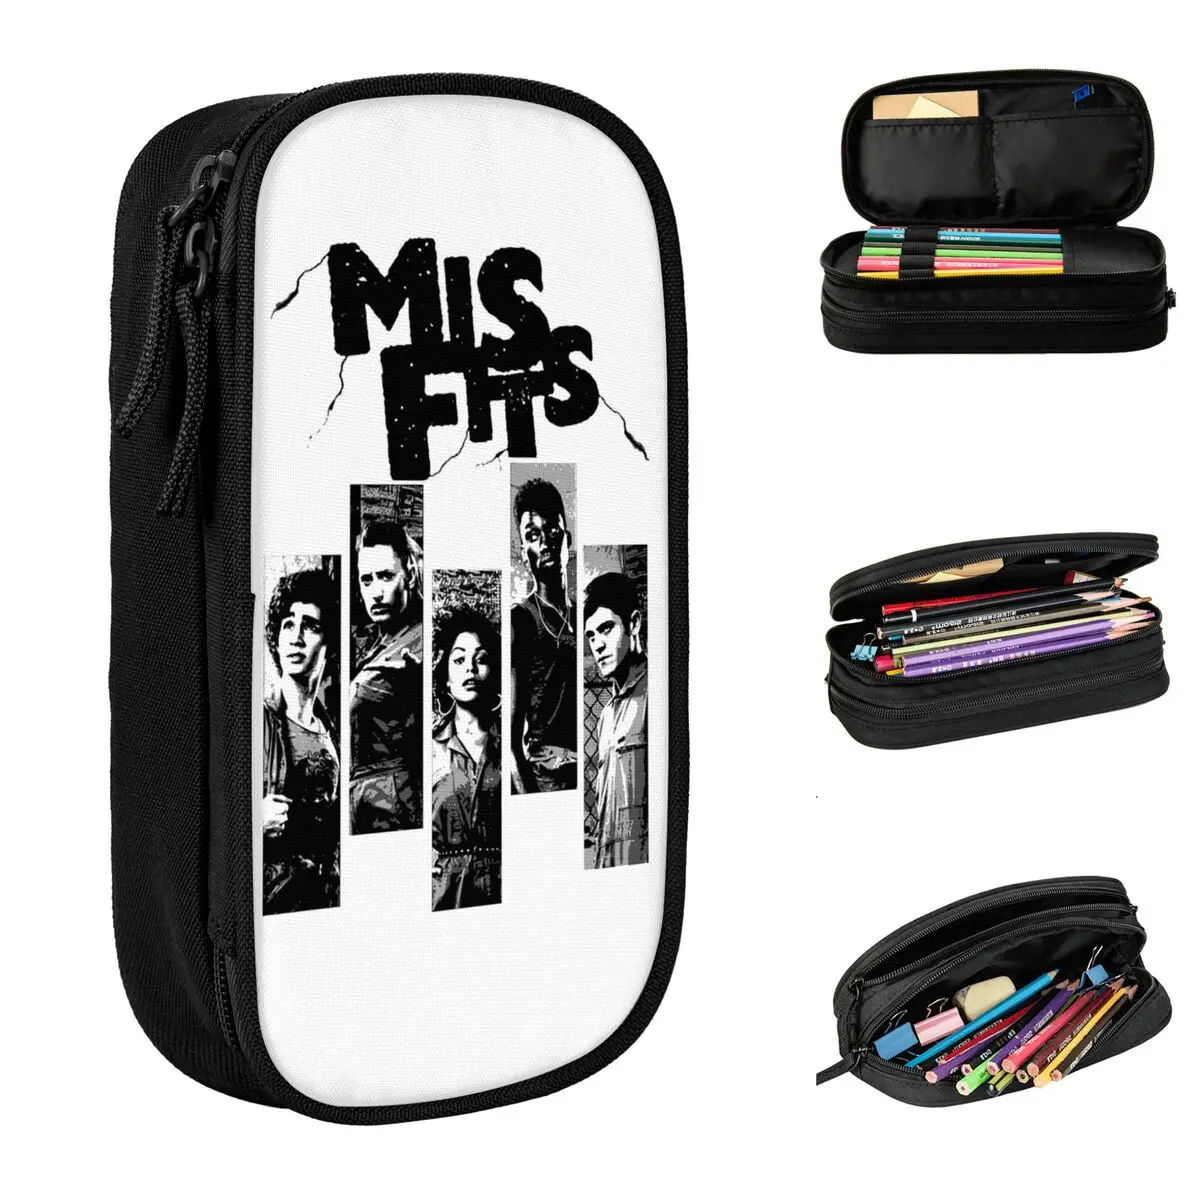 

Lovely Band Misfits Rock Ghost Pencil Cases Pencilcases Pen Holder for Student Large Storage Bags Office Gifts Stationery